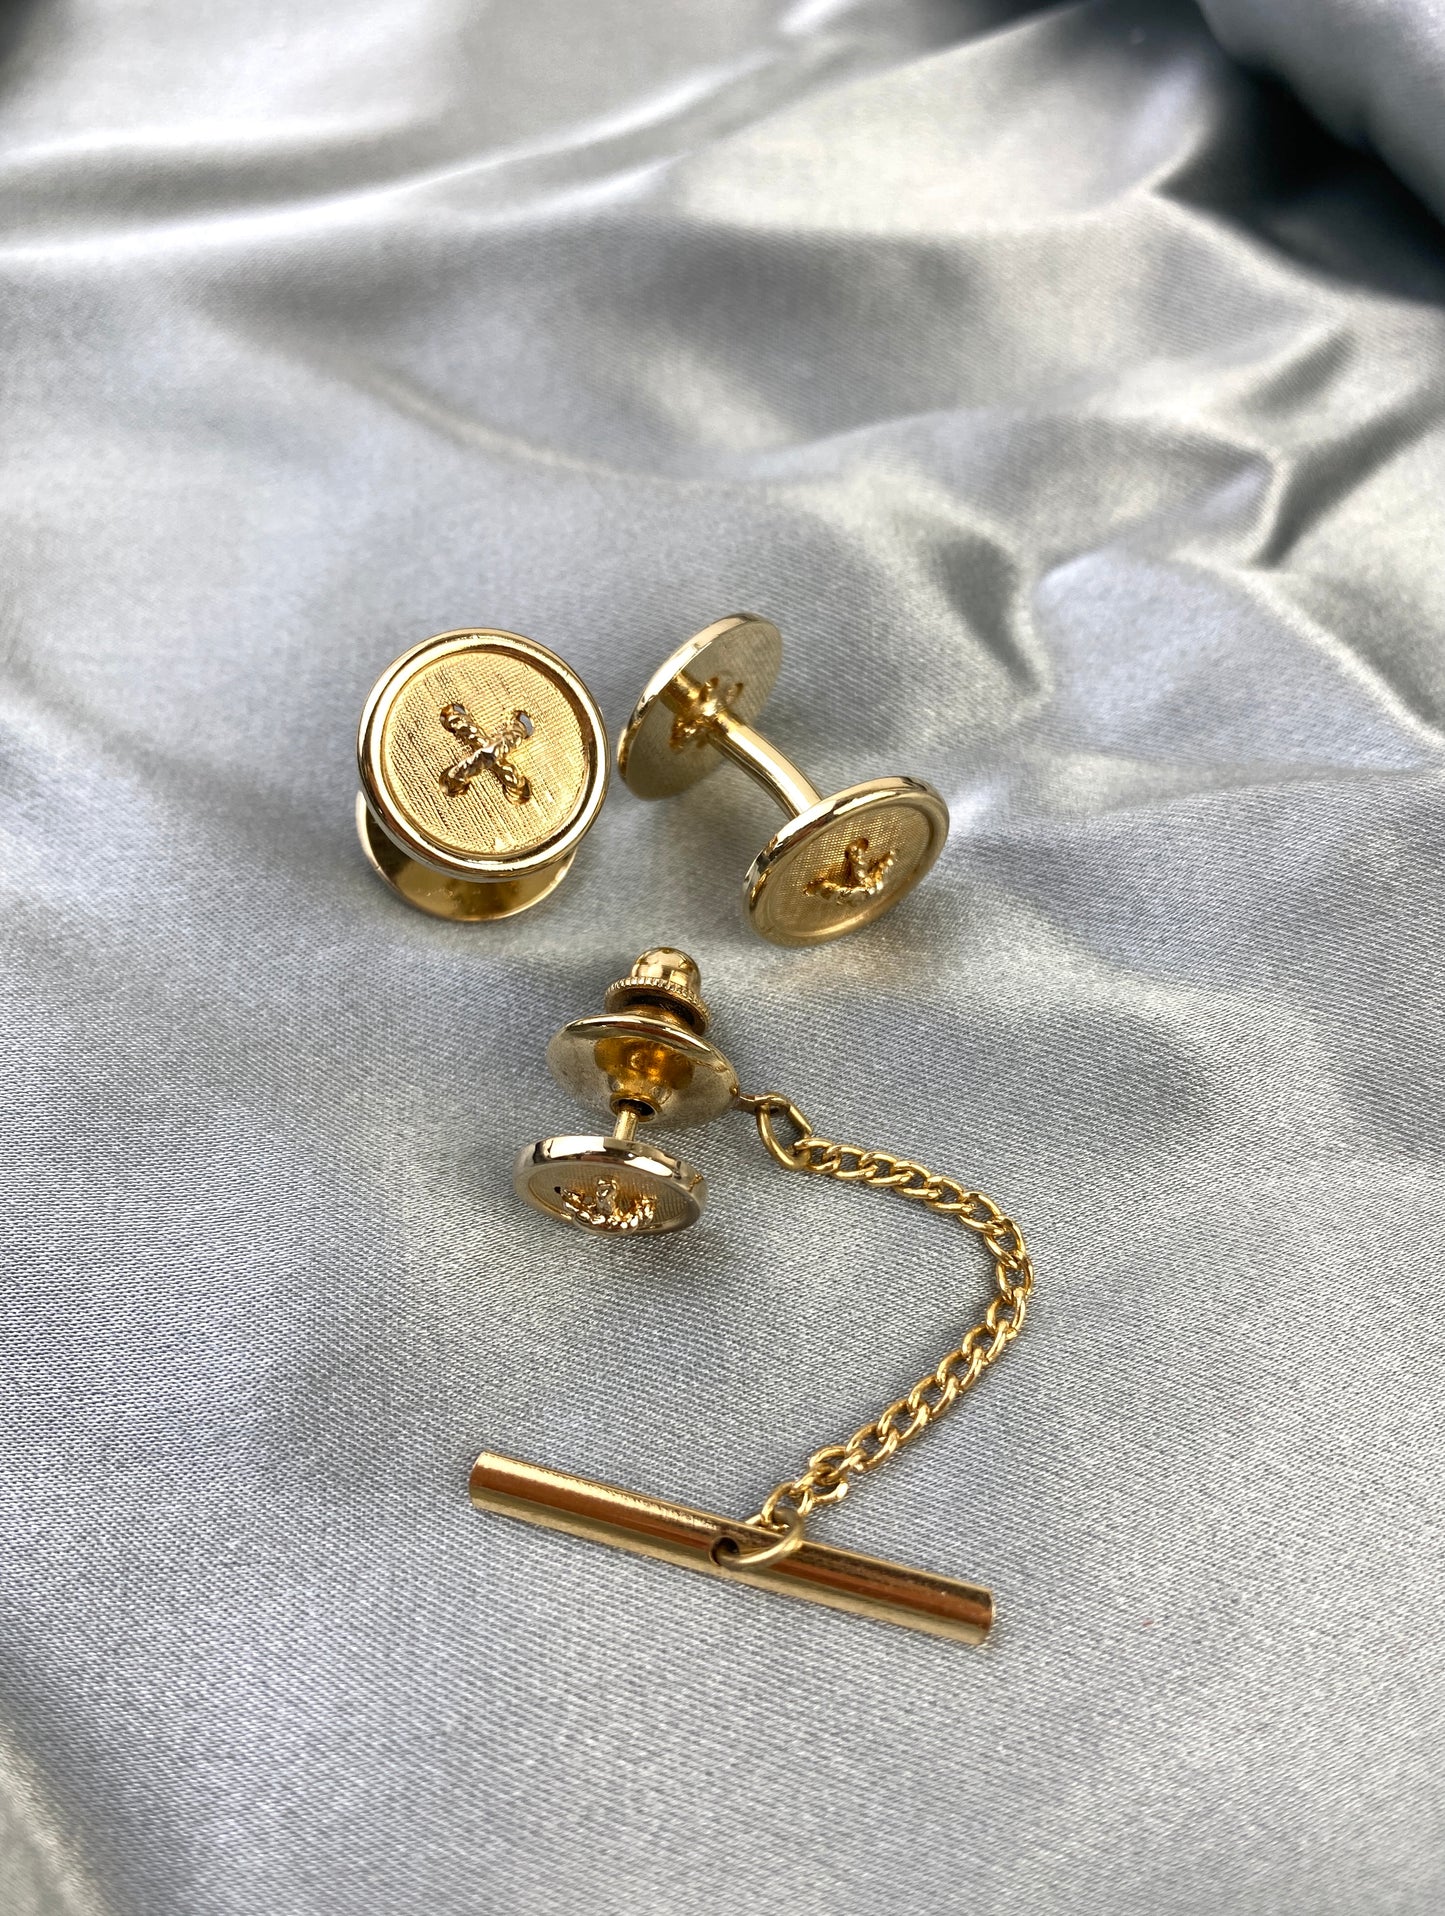 Vintage Gold Button Cufflinks and Tie Tack